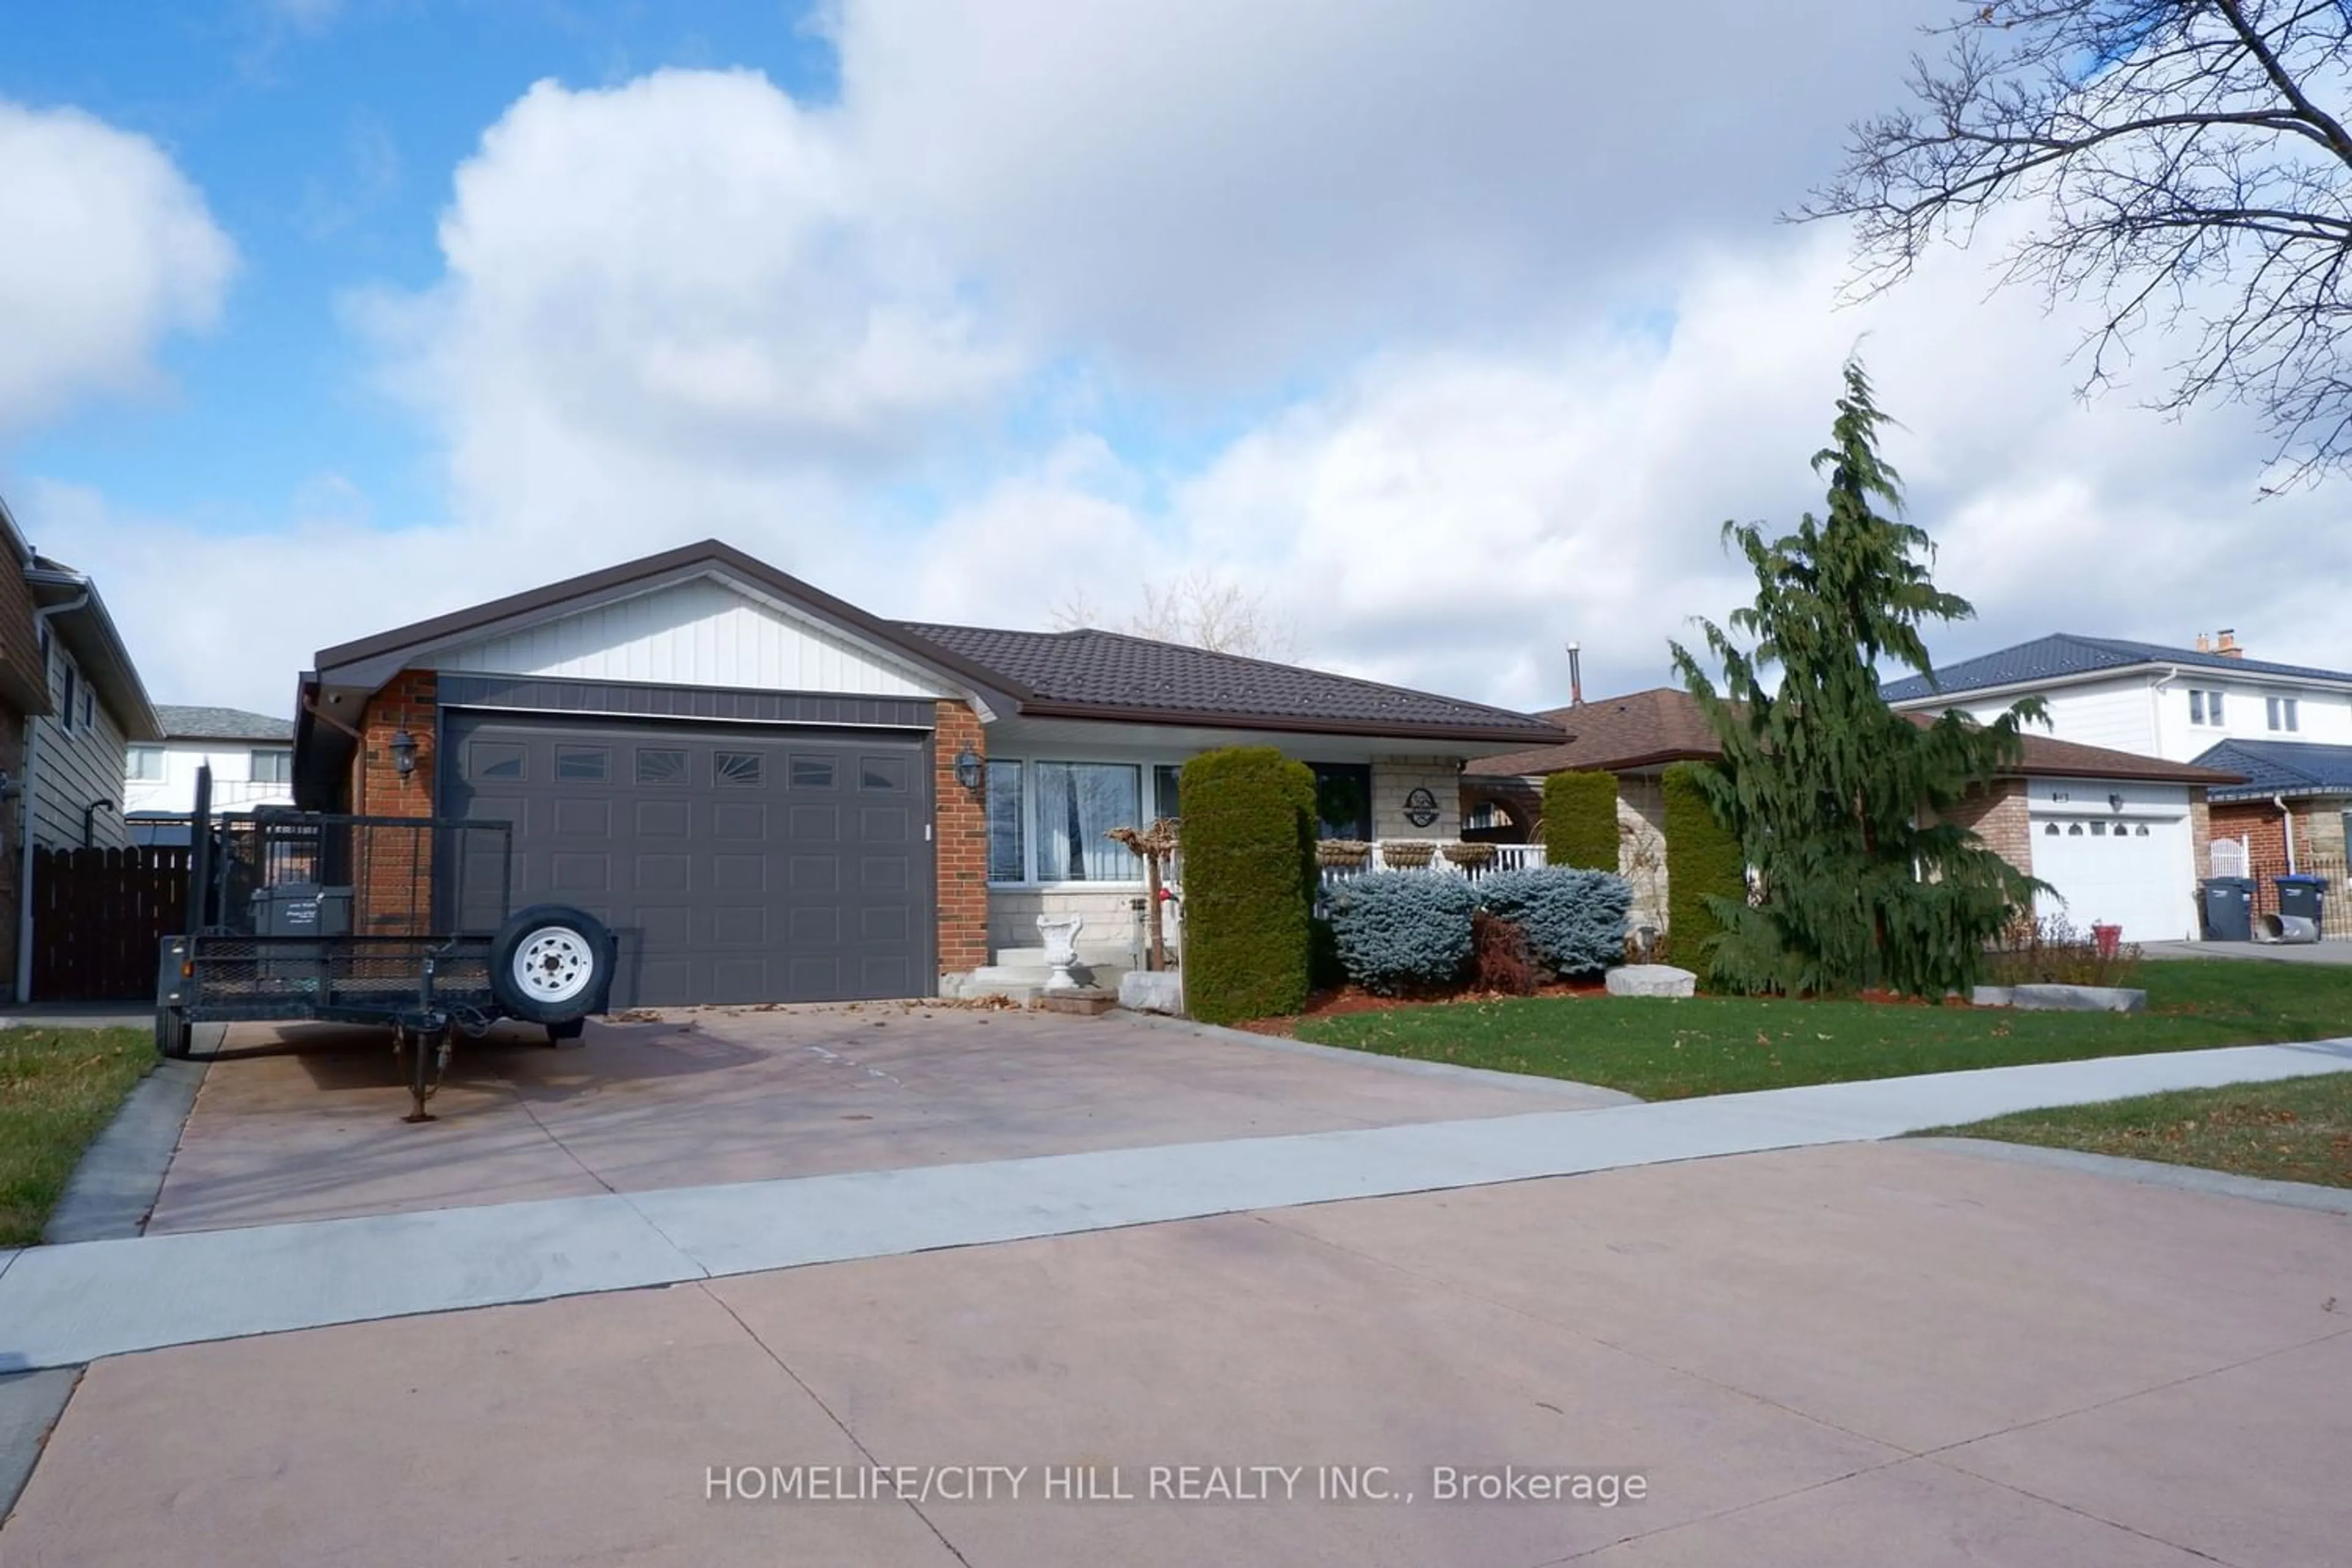 Frontside or backside of a home for 491 Paisley Blvd, Mississauga Ontario L5B 2M1